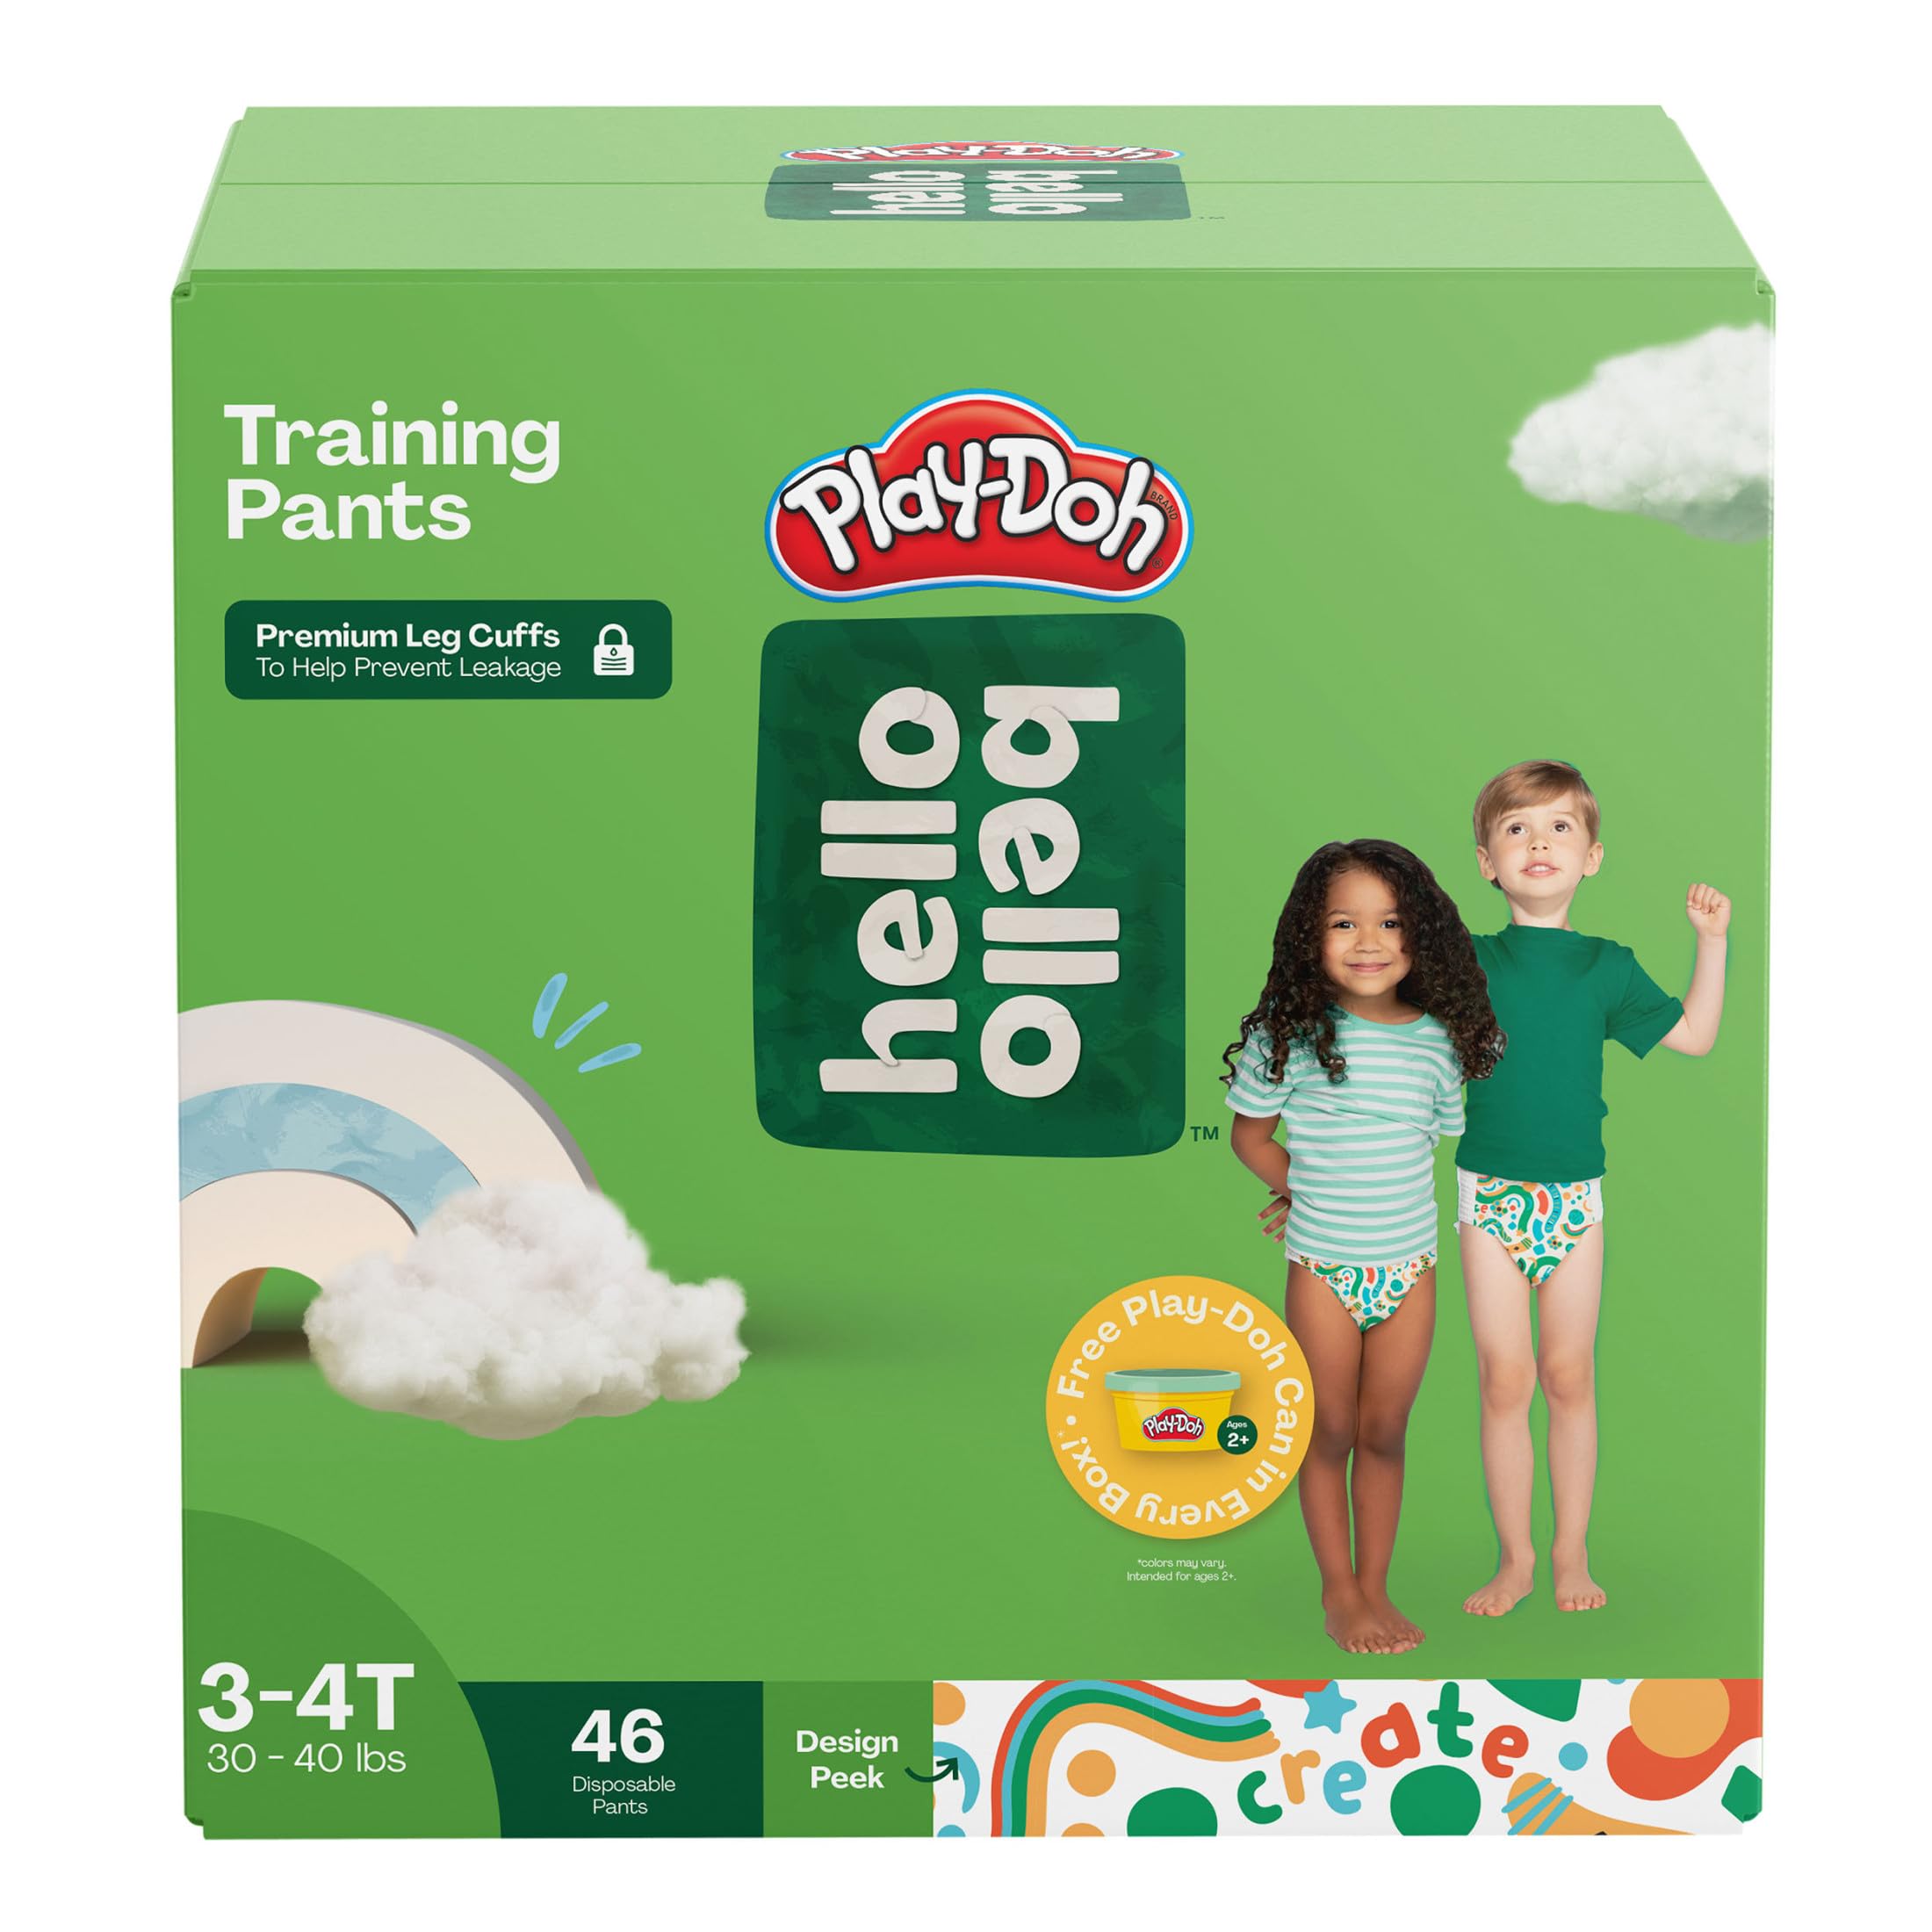 Hello Bello x Play-Doh Premium Training Pants - Size 3T-4T (30-40 lbs) in Colorful Play-Doh Designs, 46 Count